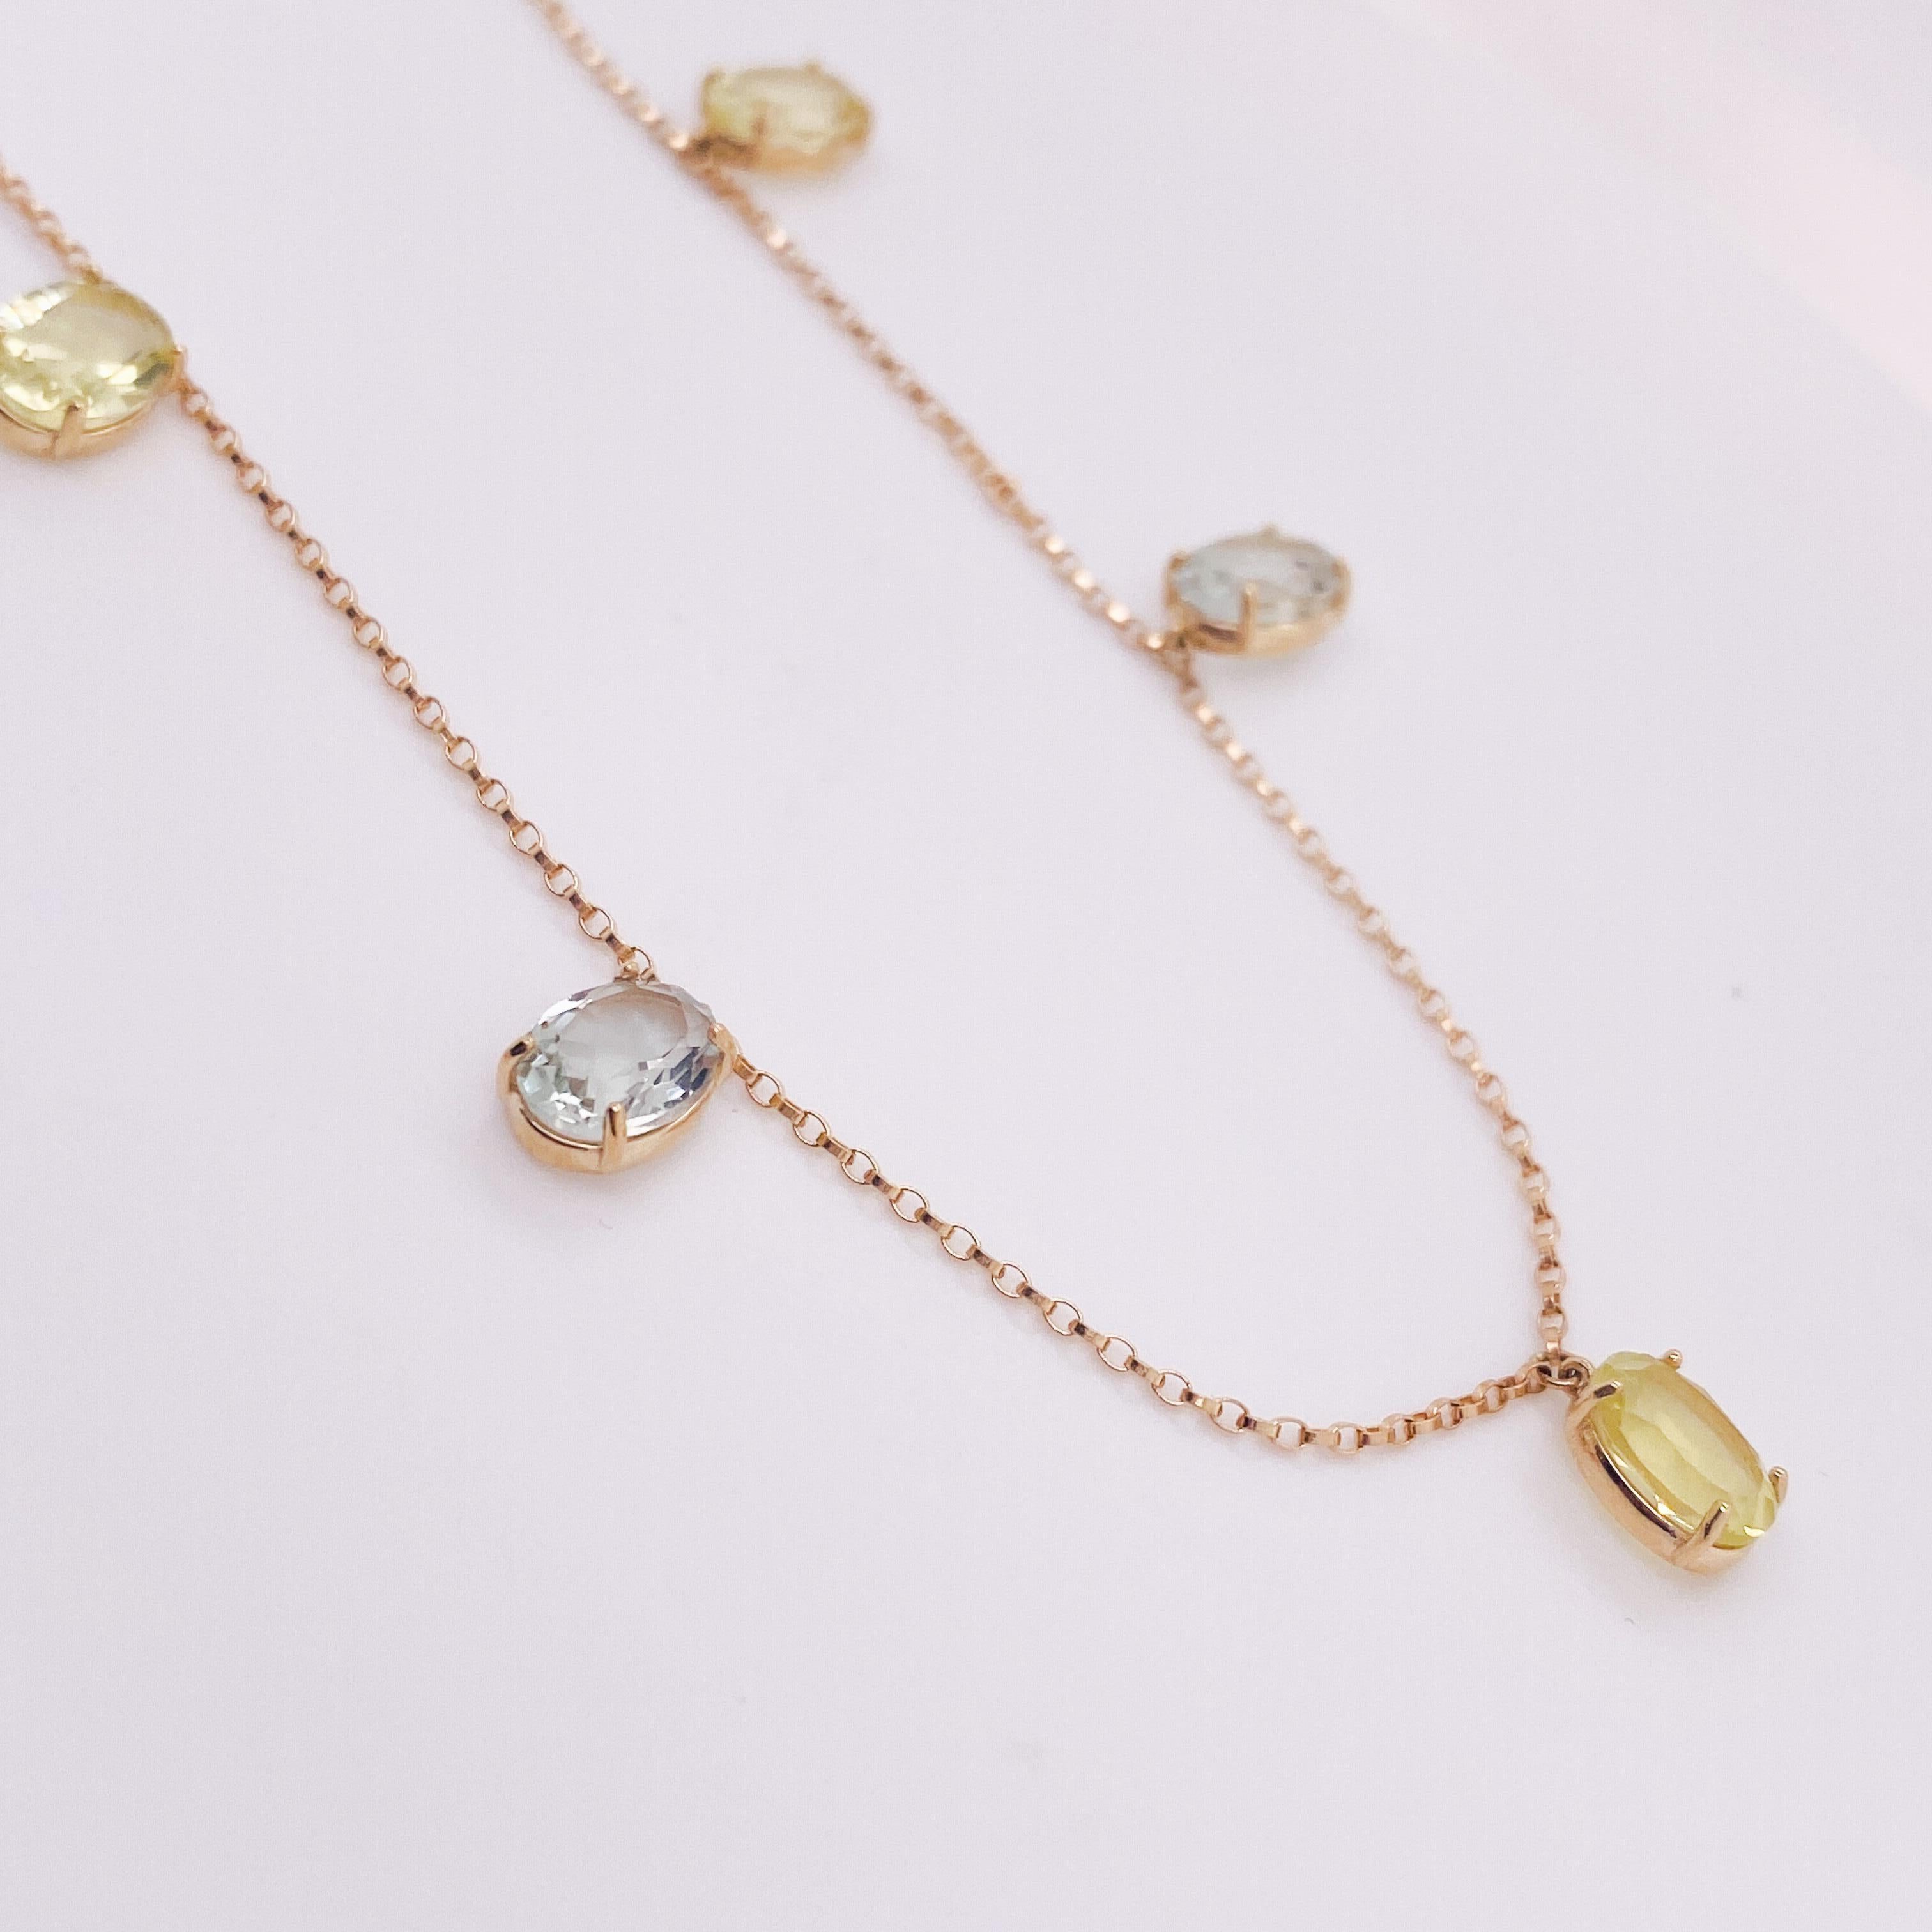 Contemporary Sweet Lemon & Mint Oval Quartz Drop Necklace, 7.50 Carats in 14k Yellow Gold Lv For Sale